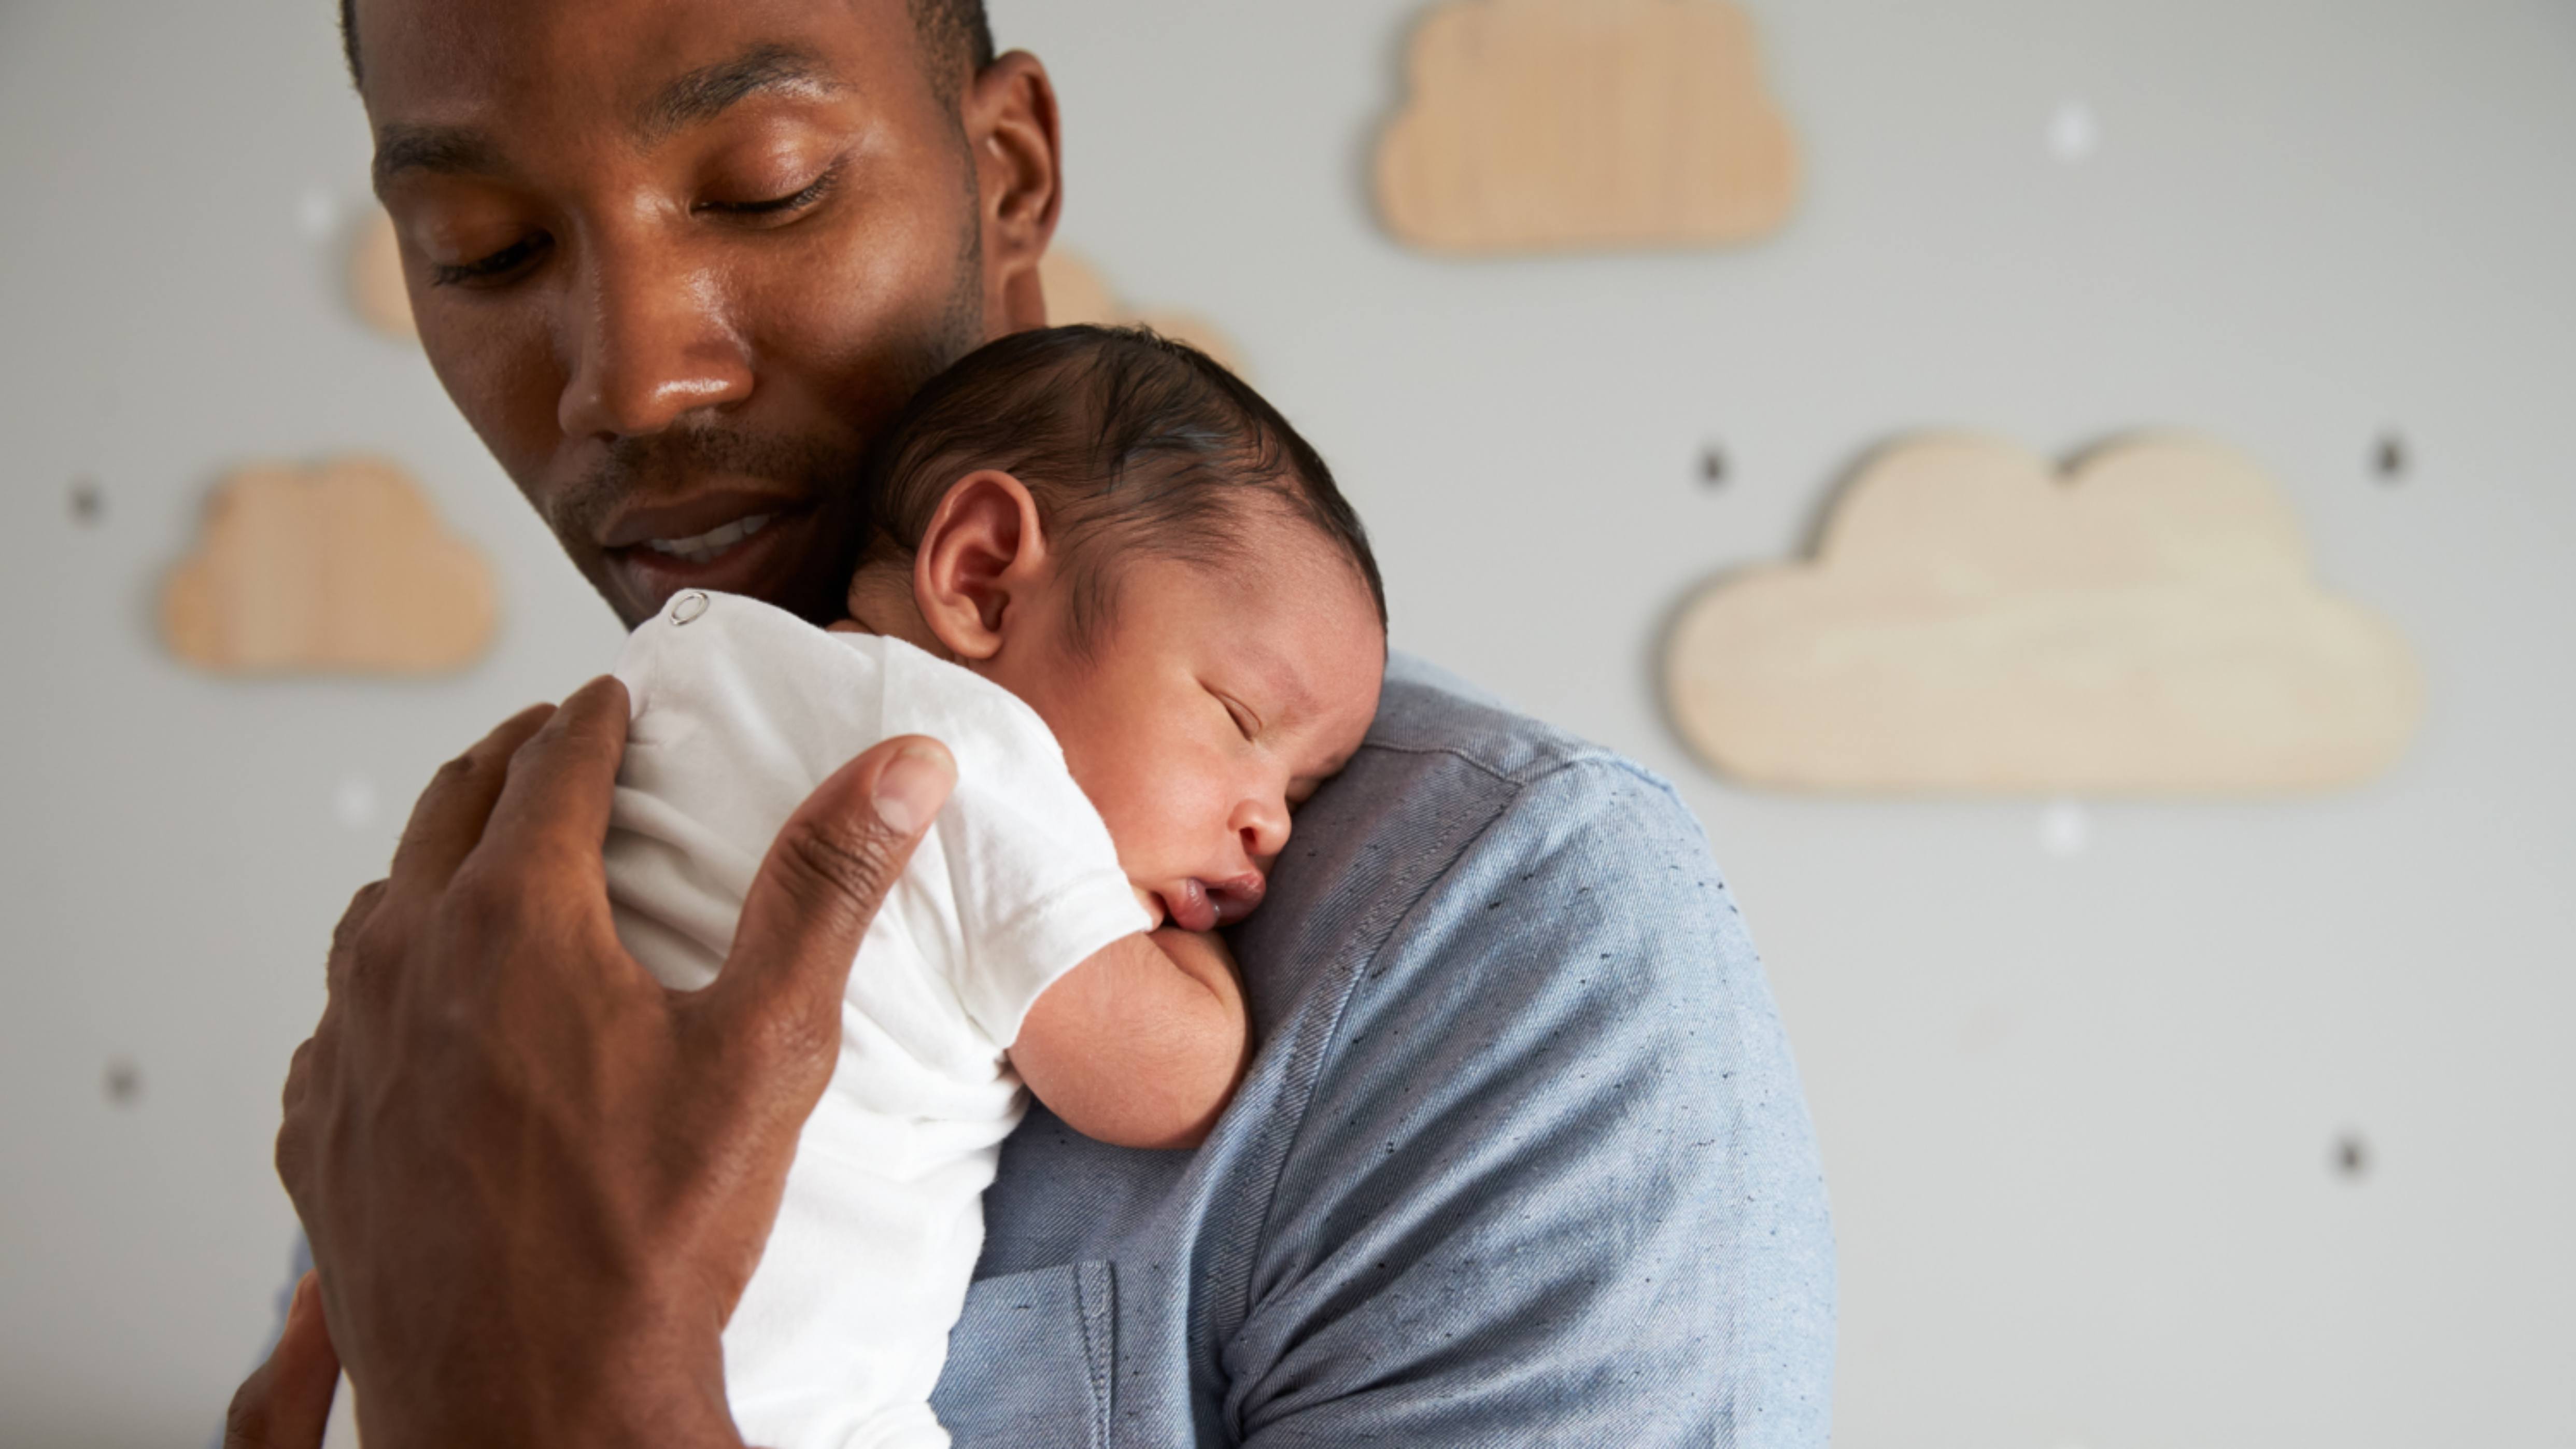 New dad Tips to help manage stress pic